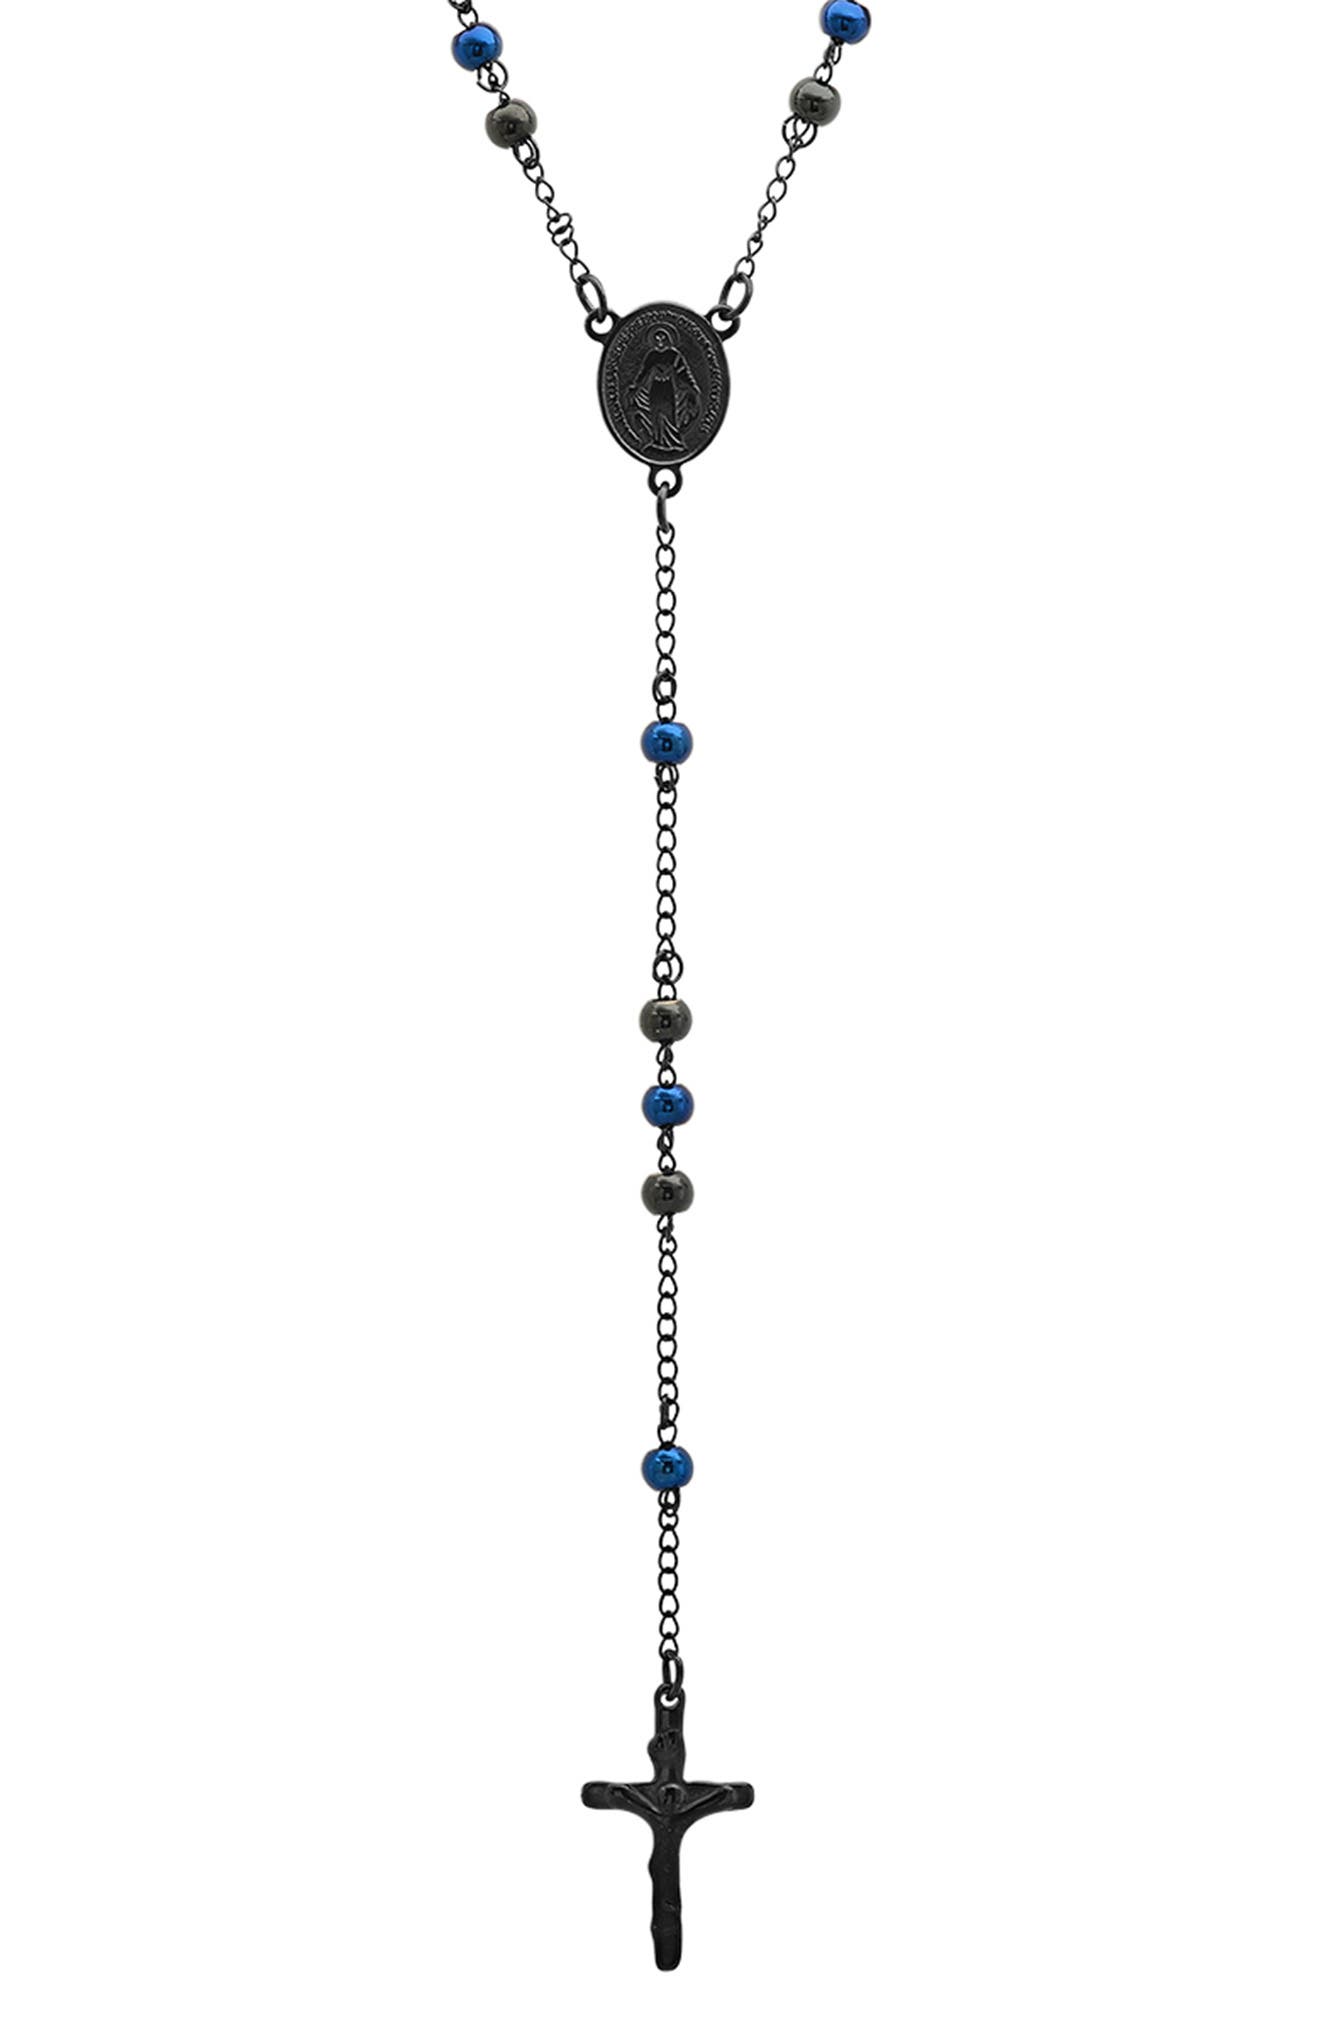 Hmy Jewelry Men's Two-tone Stainless Steel Rosary Crucifix Necklace In Blue-black